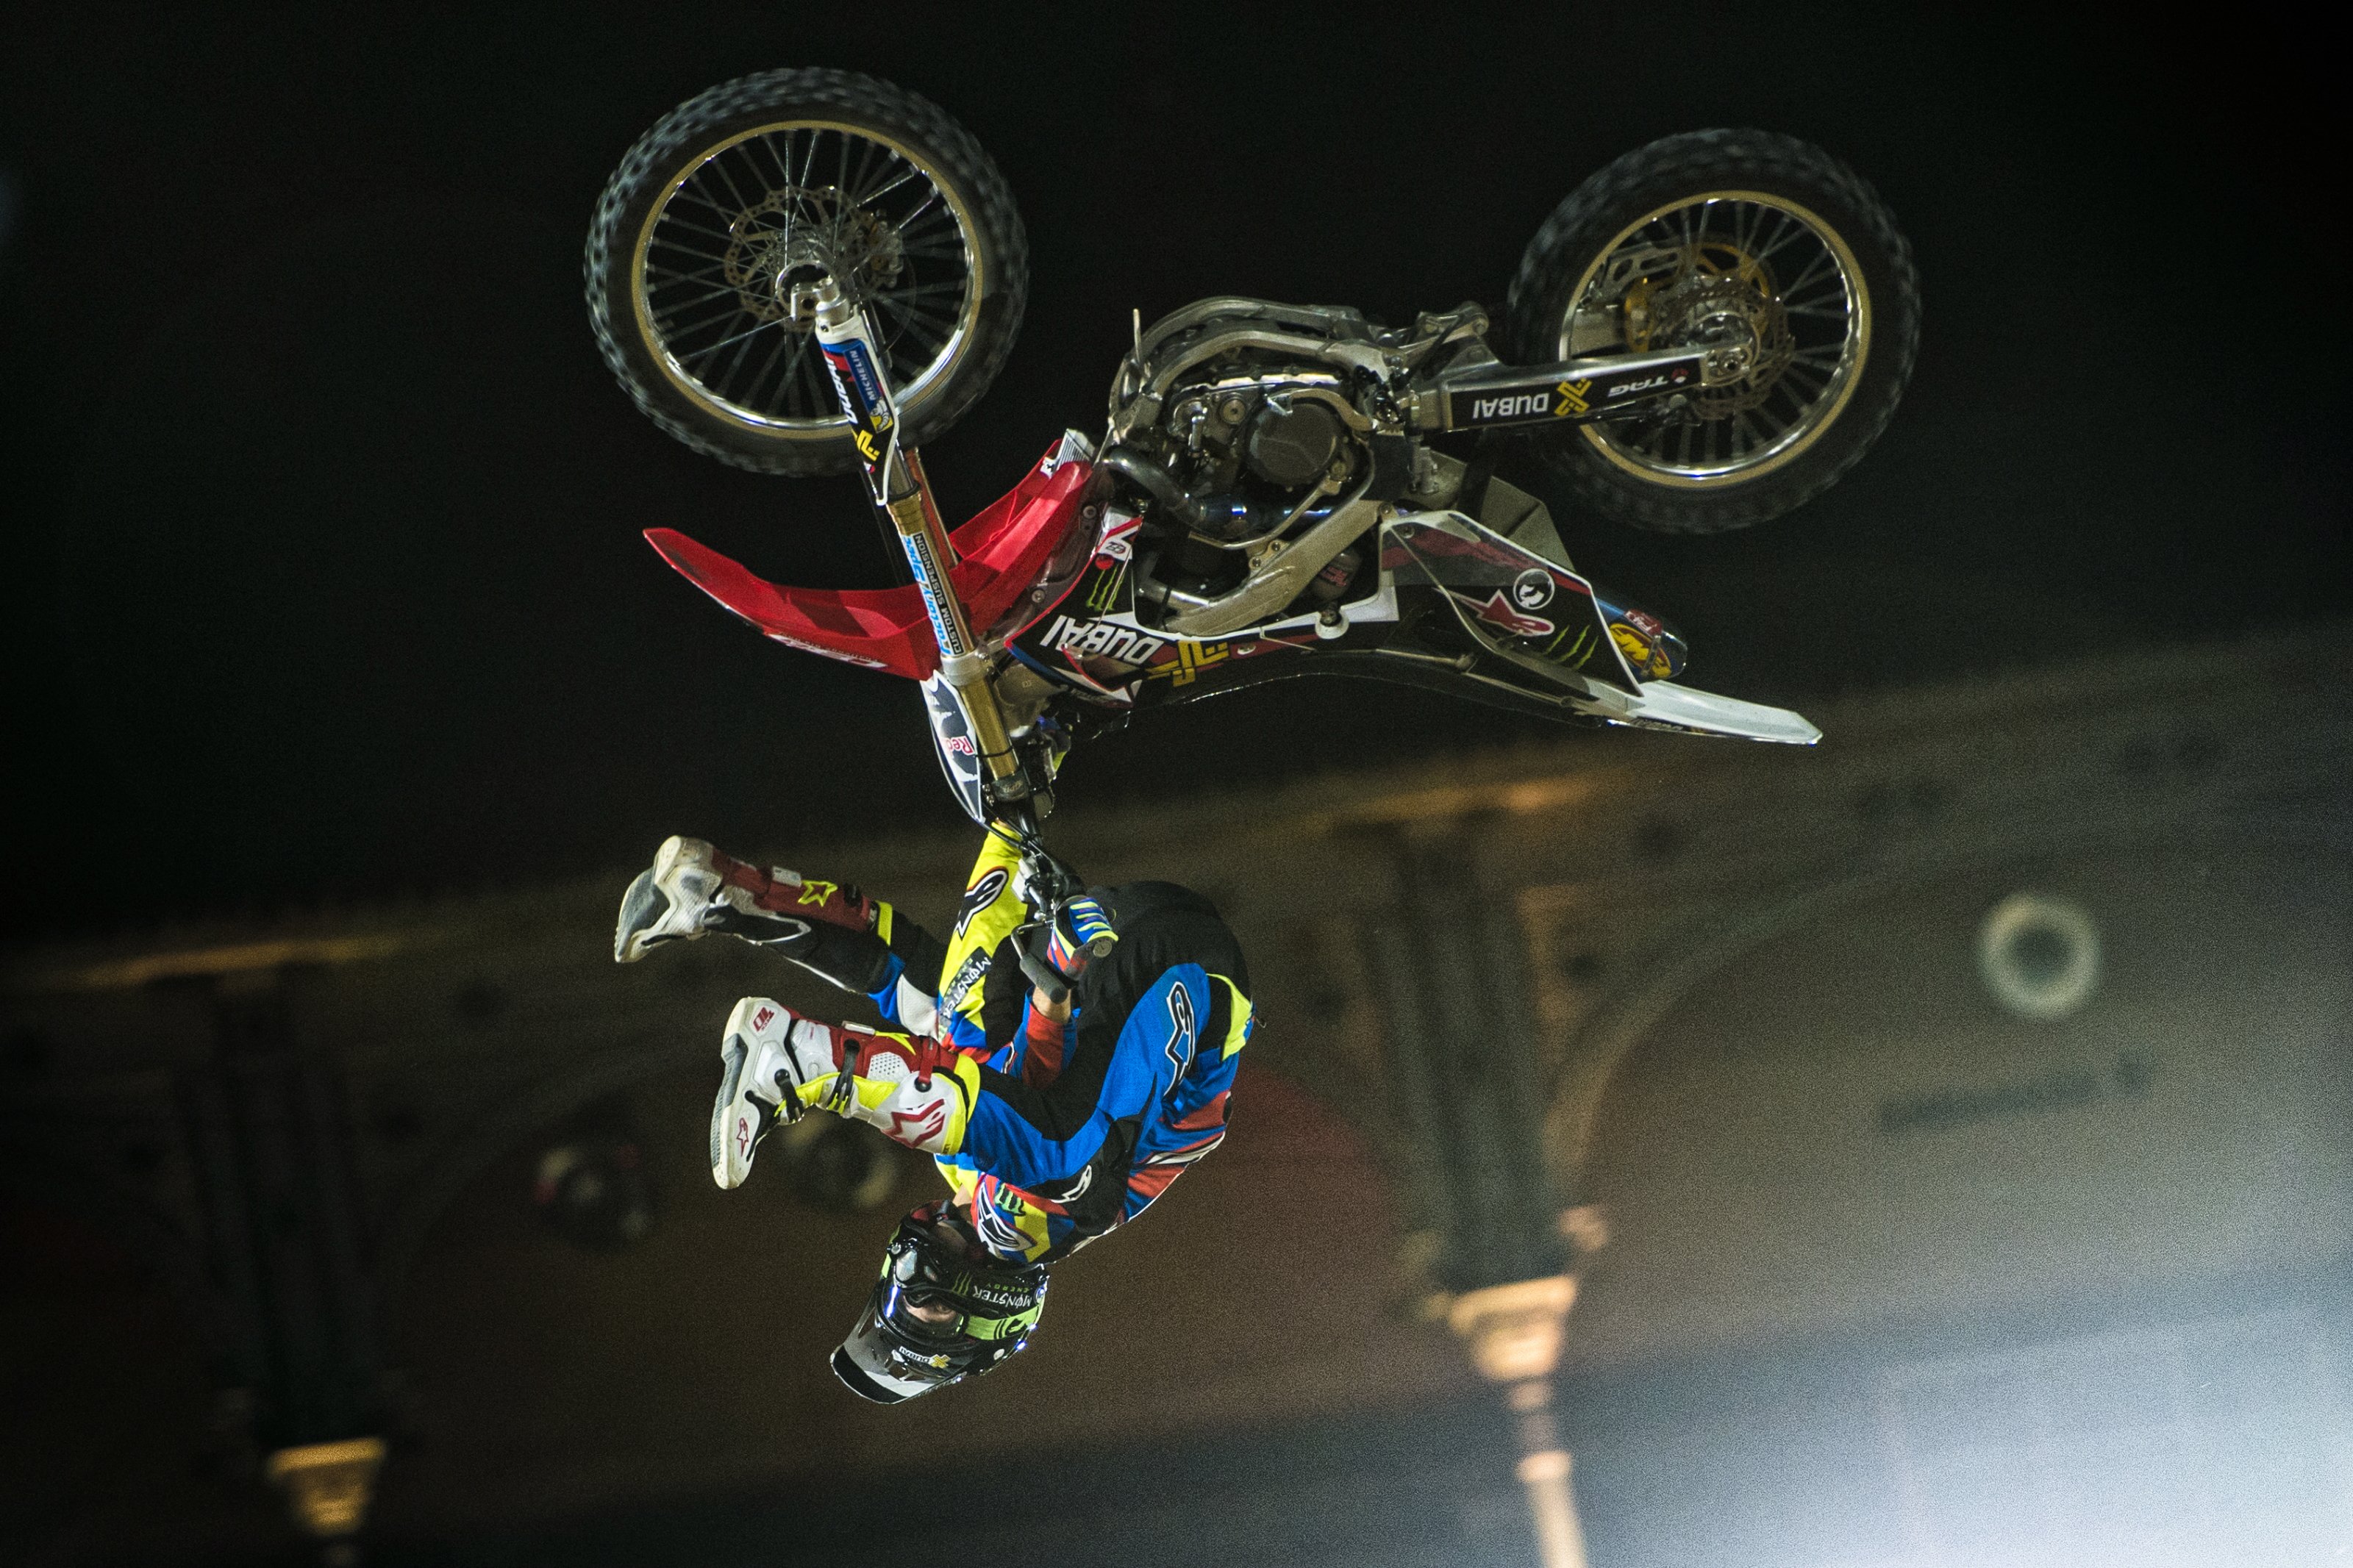 Josh Sheehan of Australia performs during the qualifying of the Red Bull X-Fighters at the Plaza de Toros de Las Ventas in Madrid, Spain on June 23, 2016.